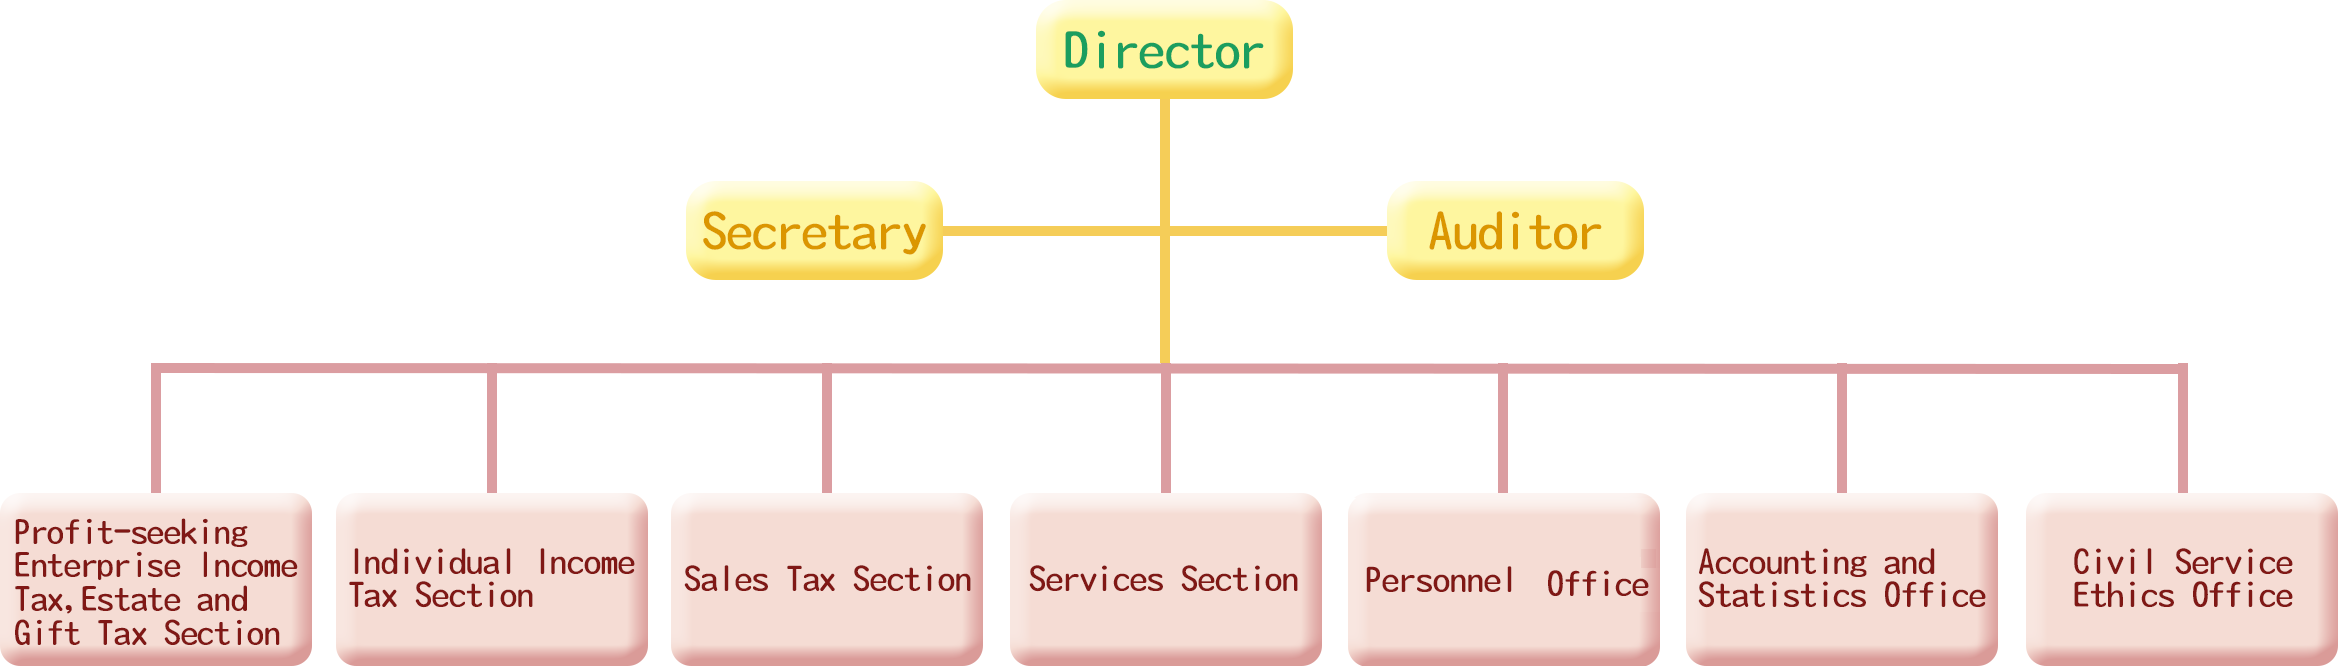 Organization Structure of Taichung Branch.png